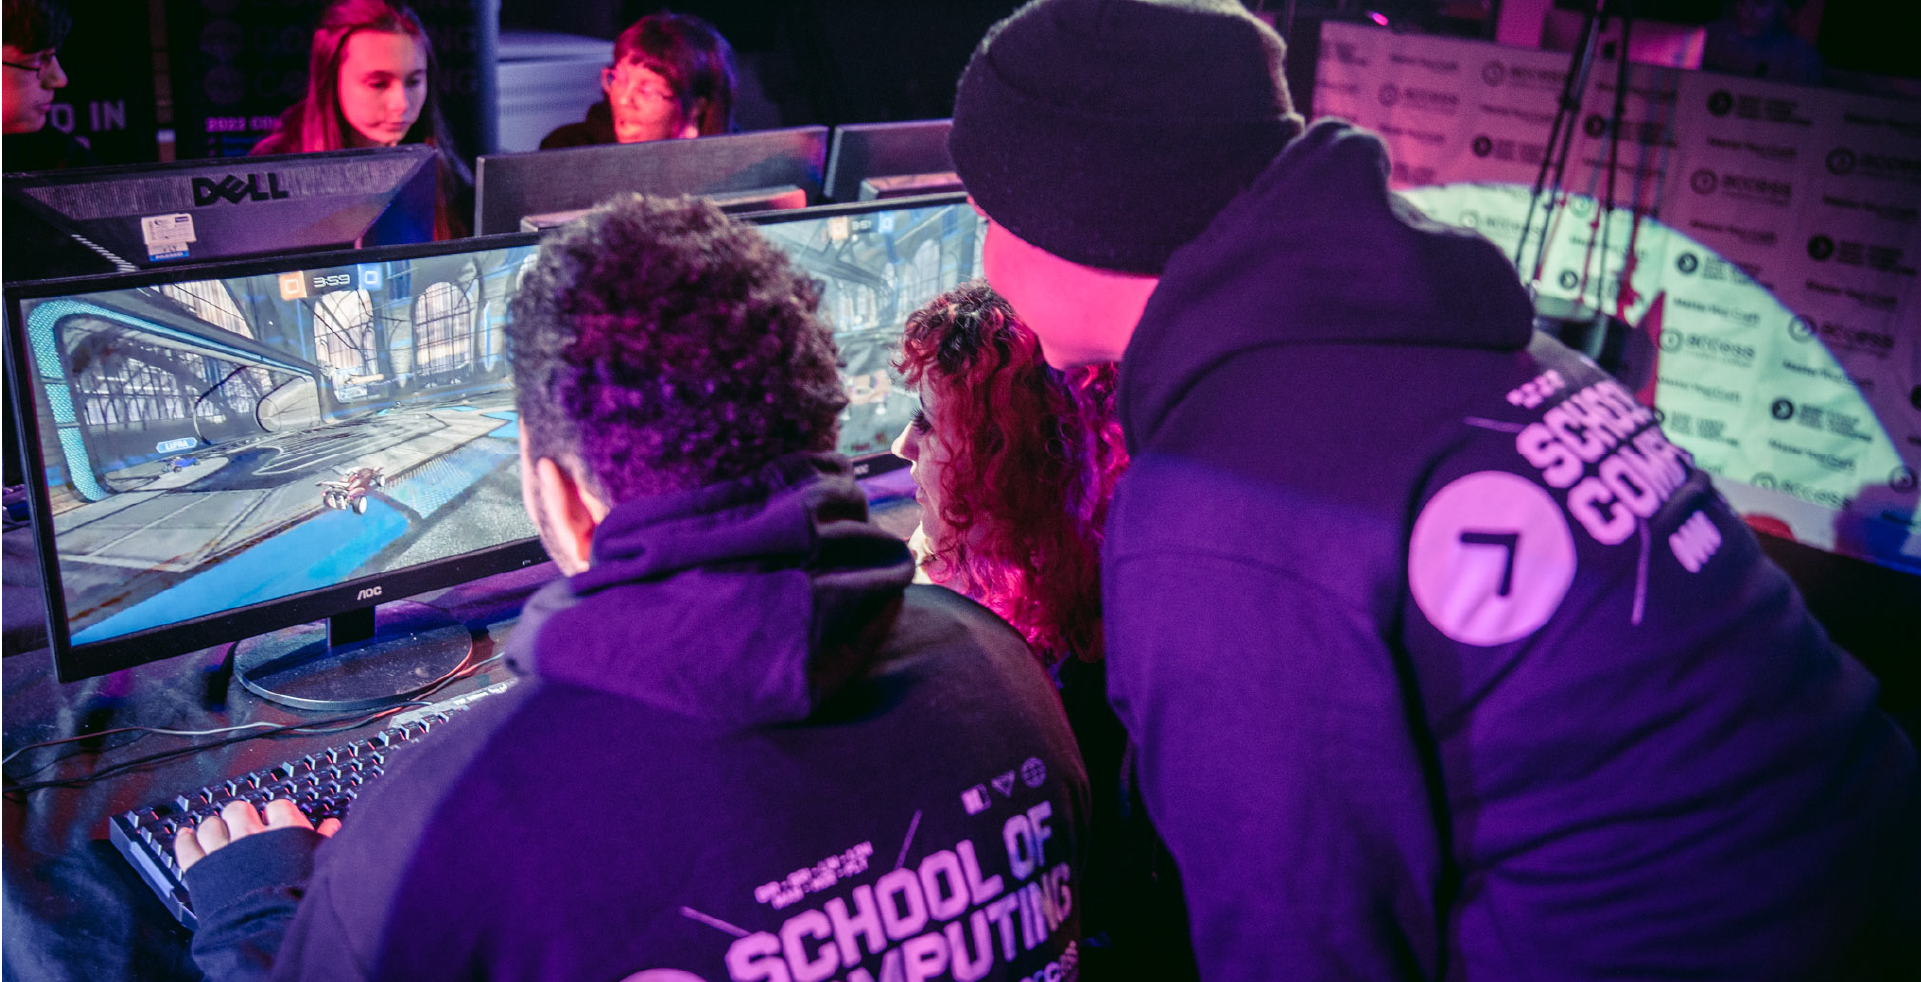 Two groups of people competing in esports tournament, at banks of computers